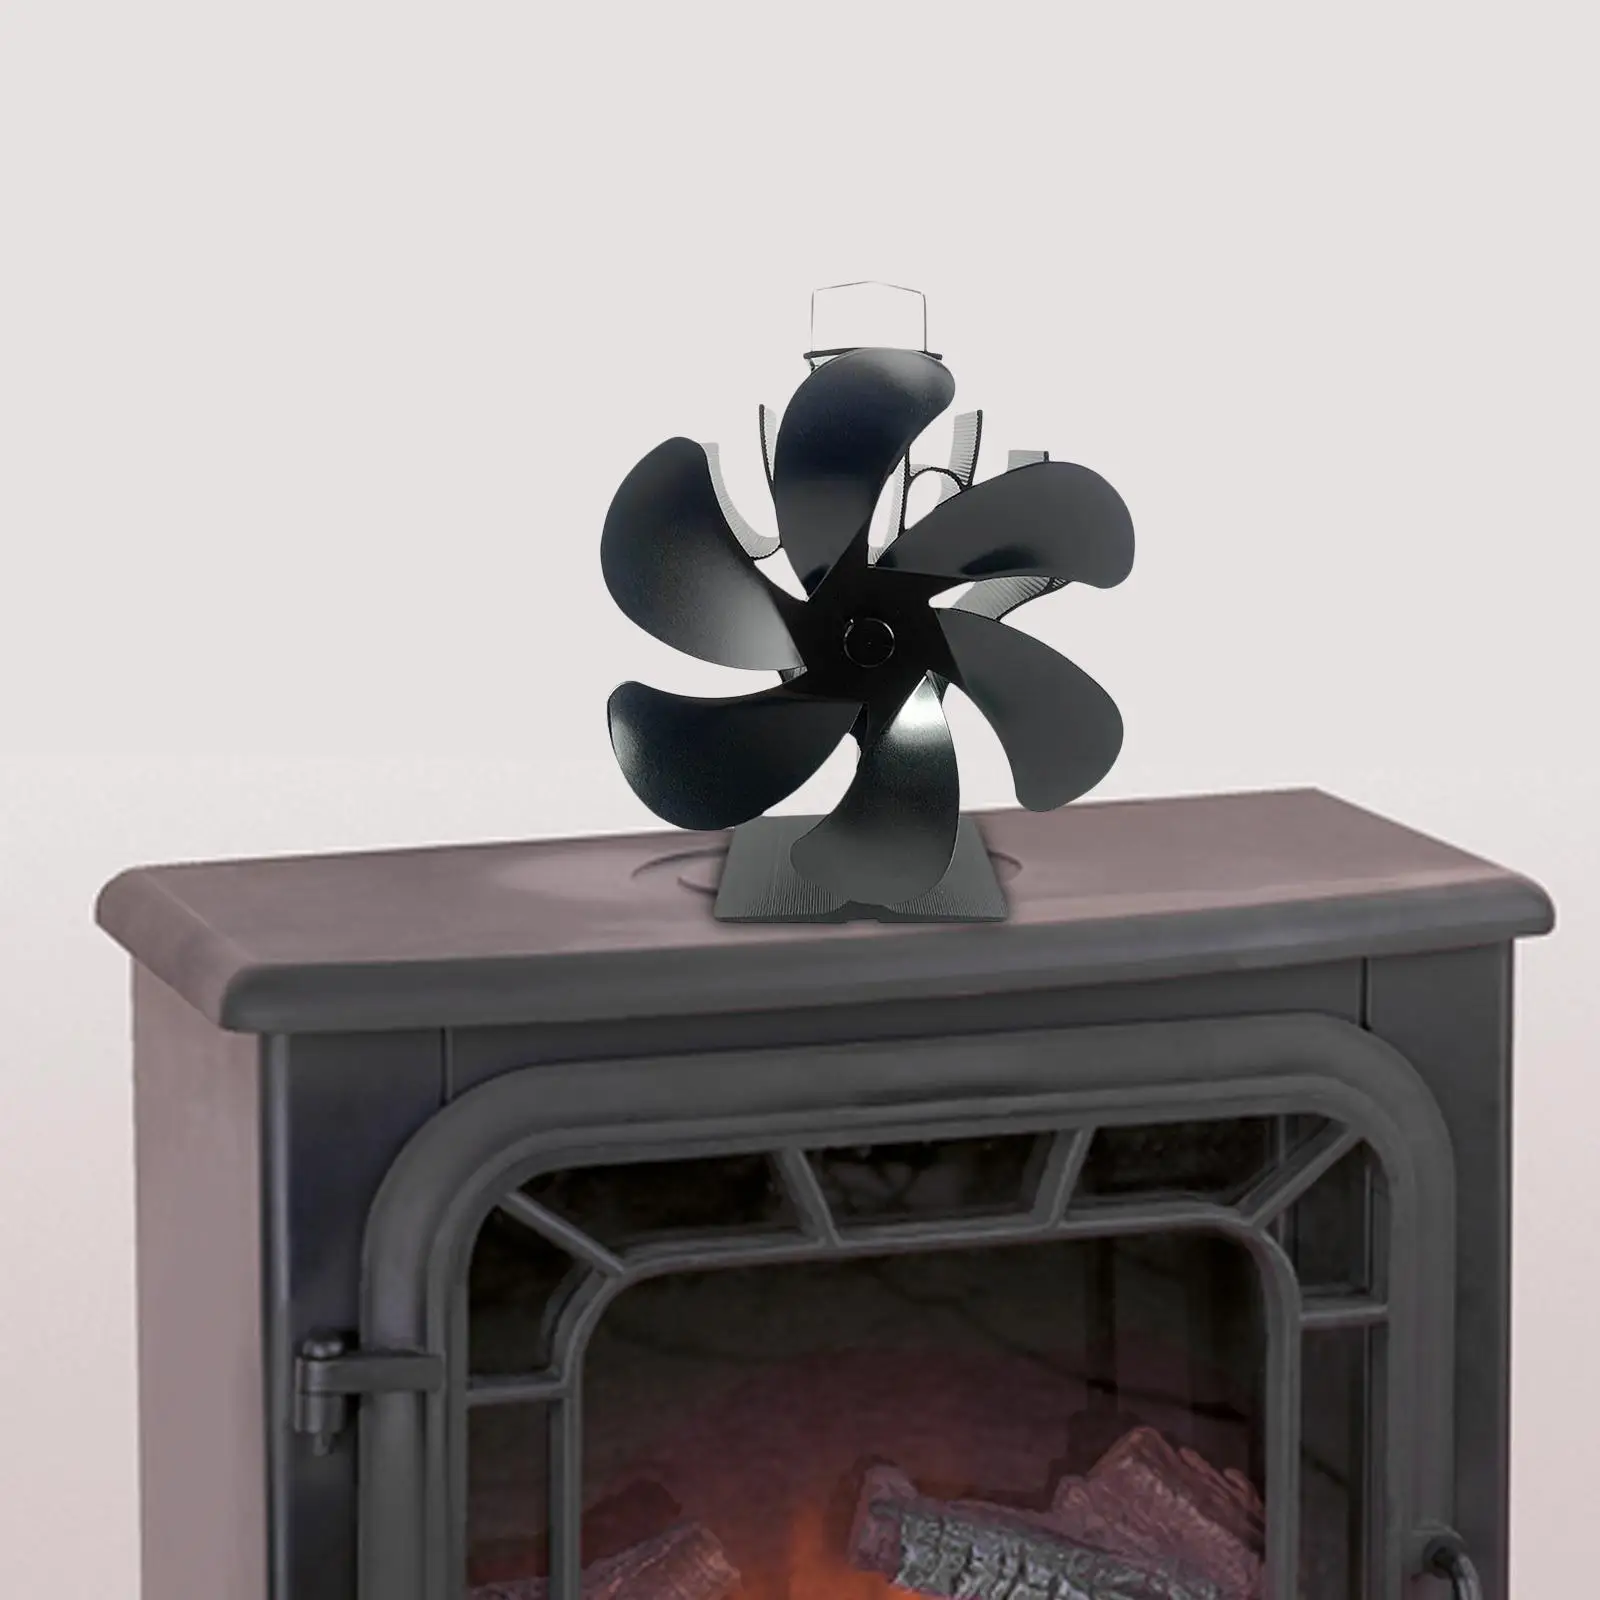 6 Blades Heat Powered Fireplace Fan Non Wood/logs Stove Fan for Fireplace Picnics Heaters Log Burner Wood Burning Stove